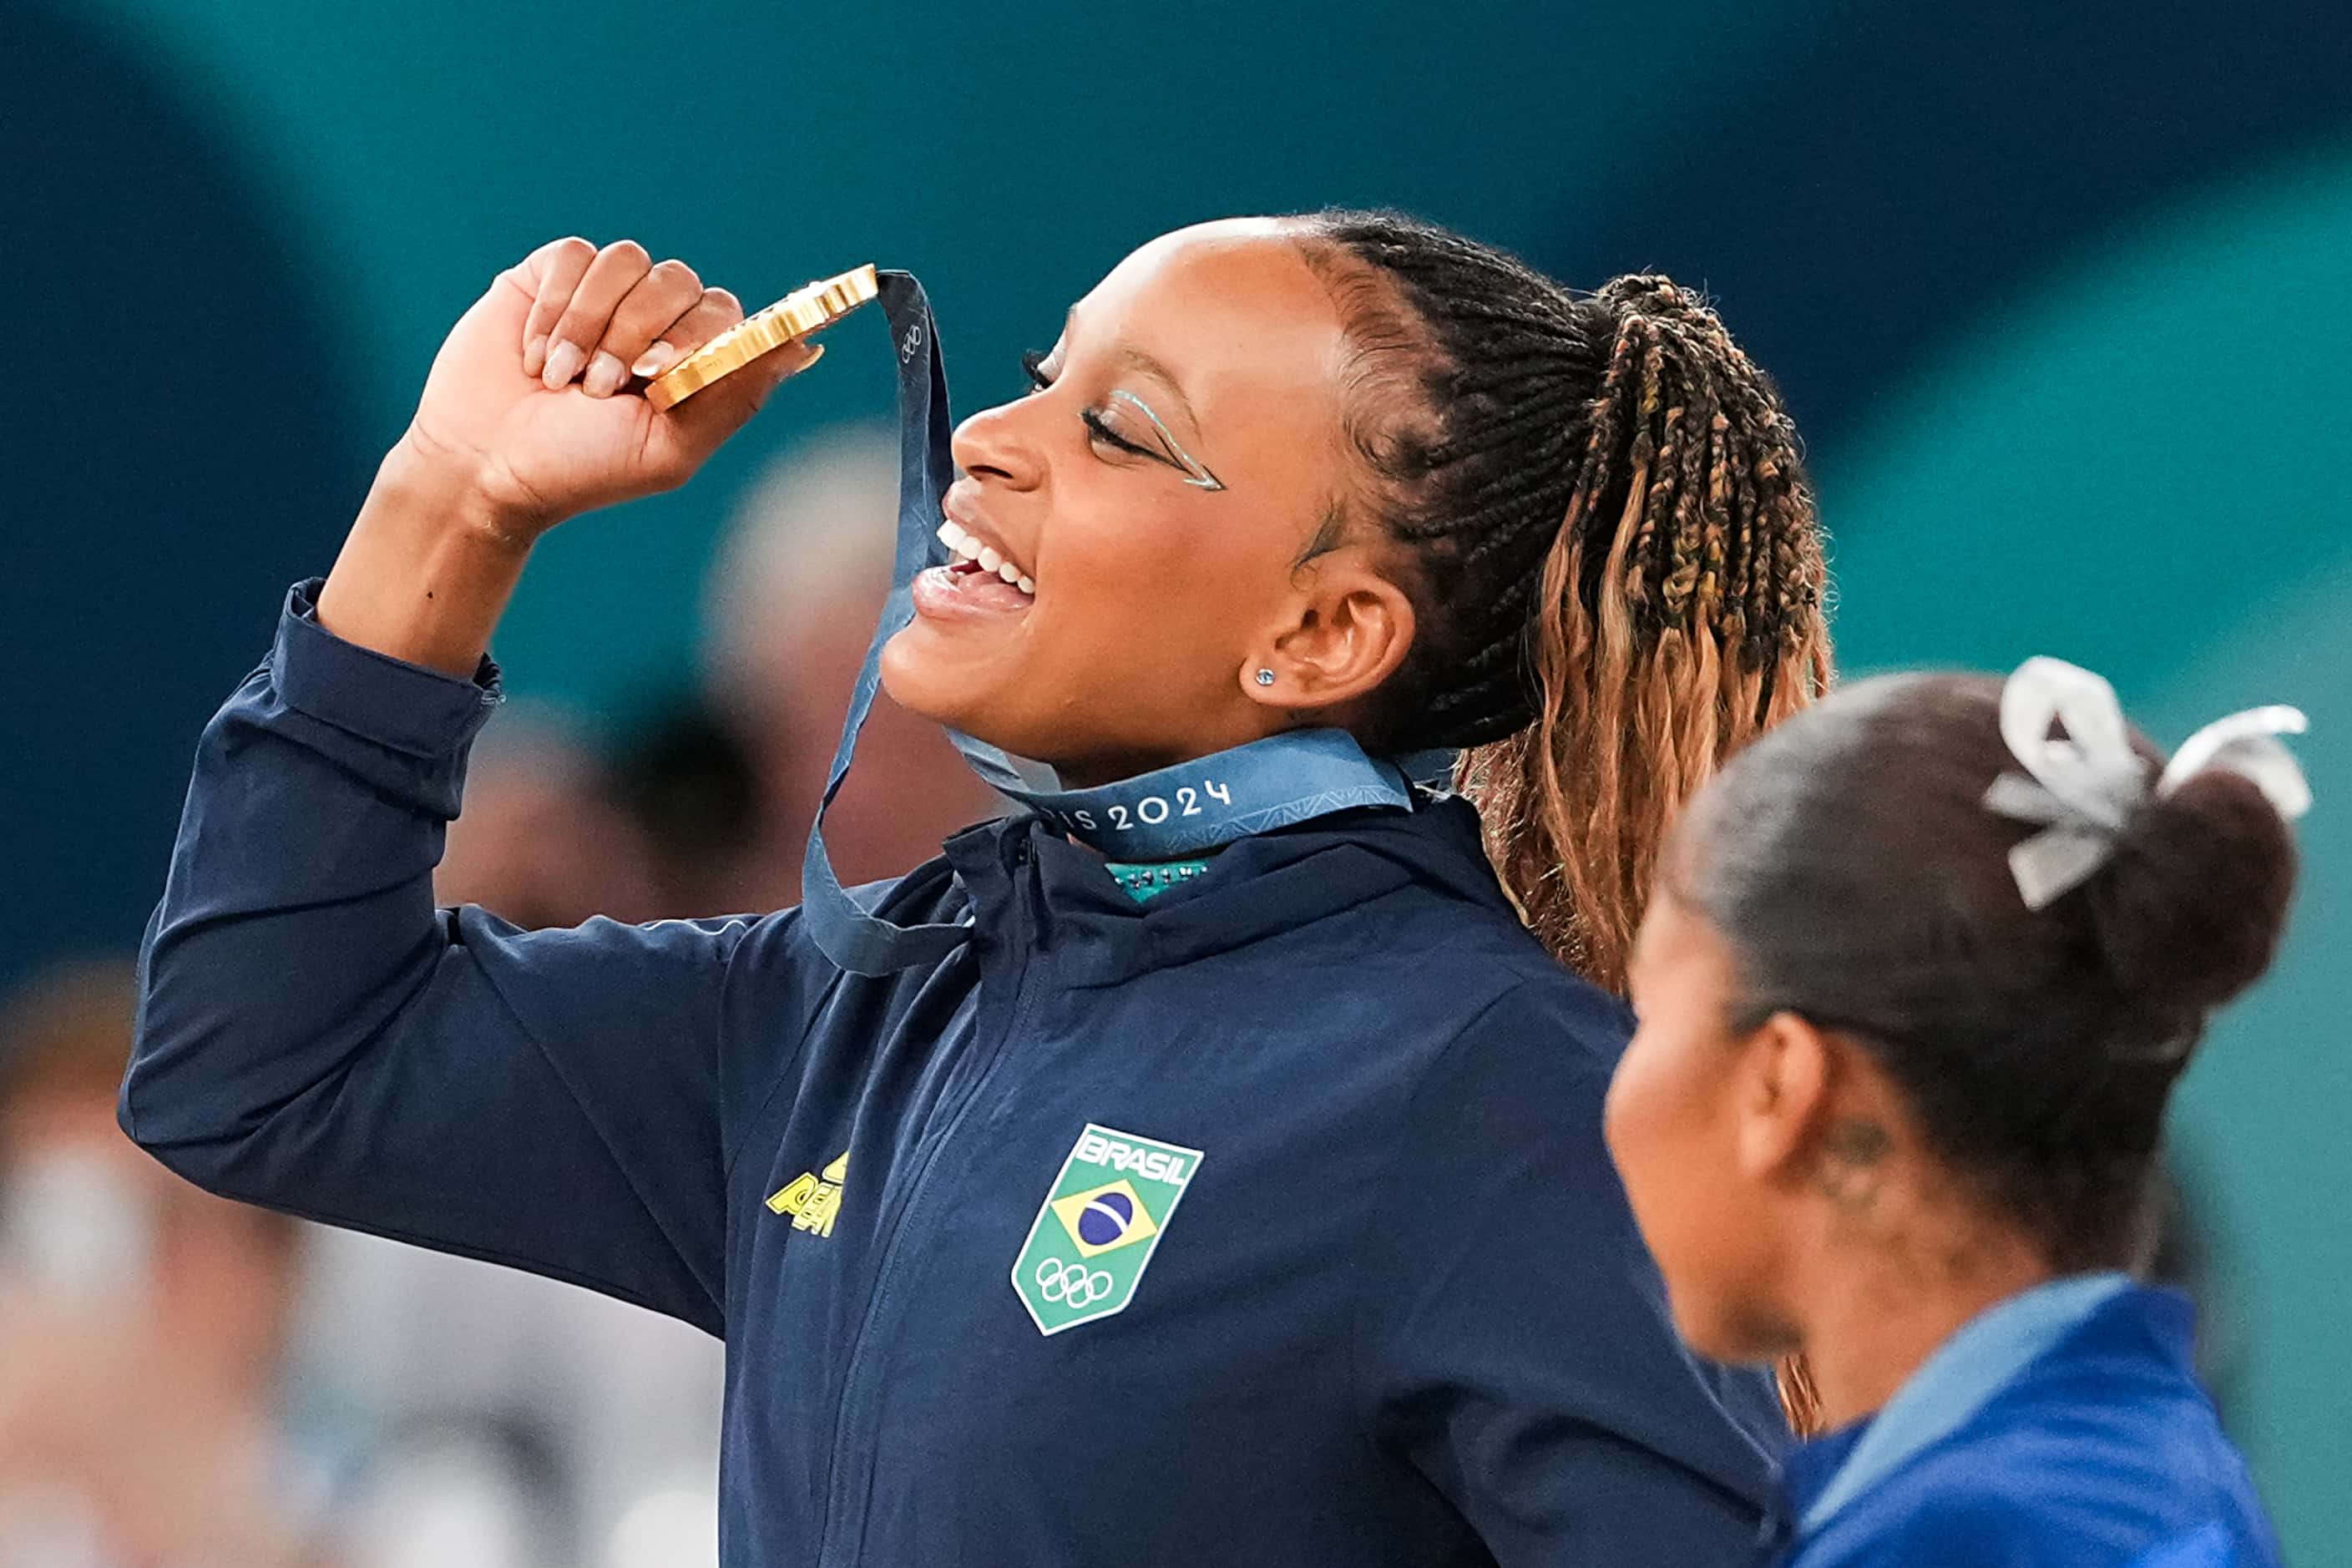 Gold medalist Rebeca Andrade of Brazil reacts after being awarded her medal after the...